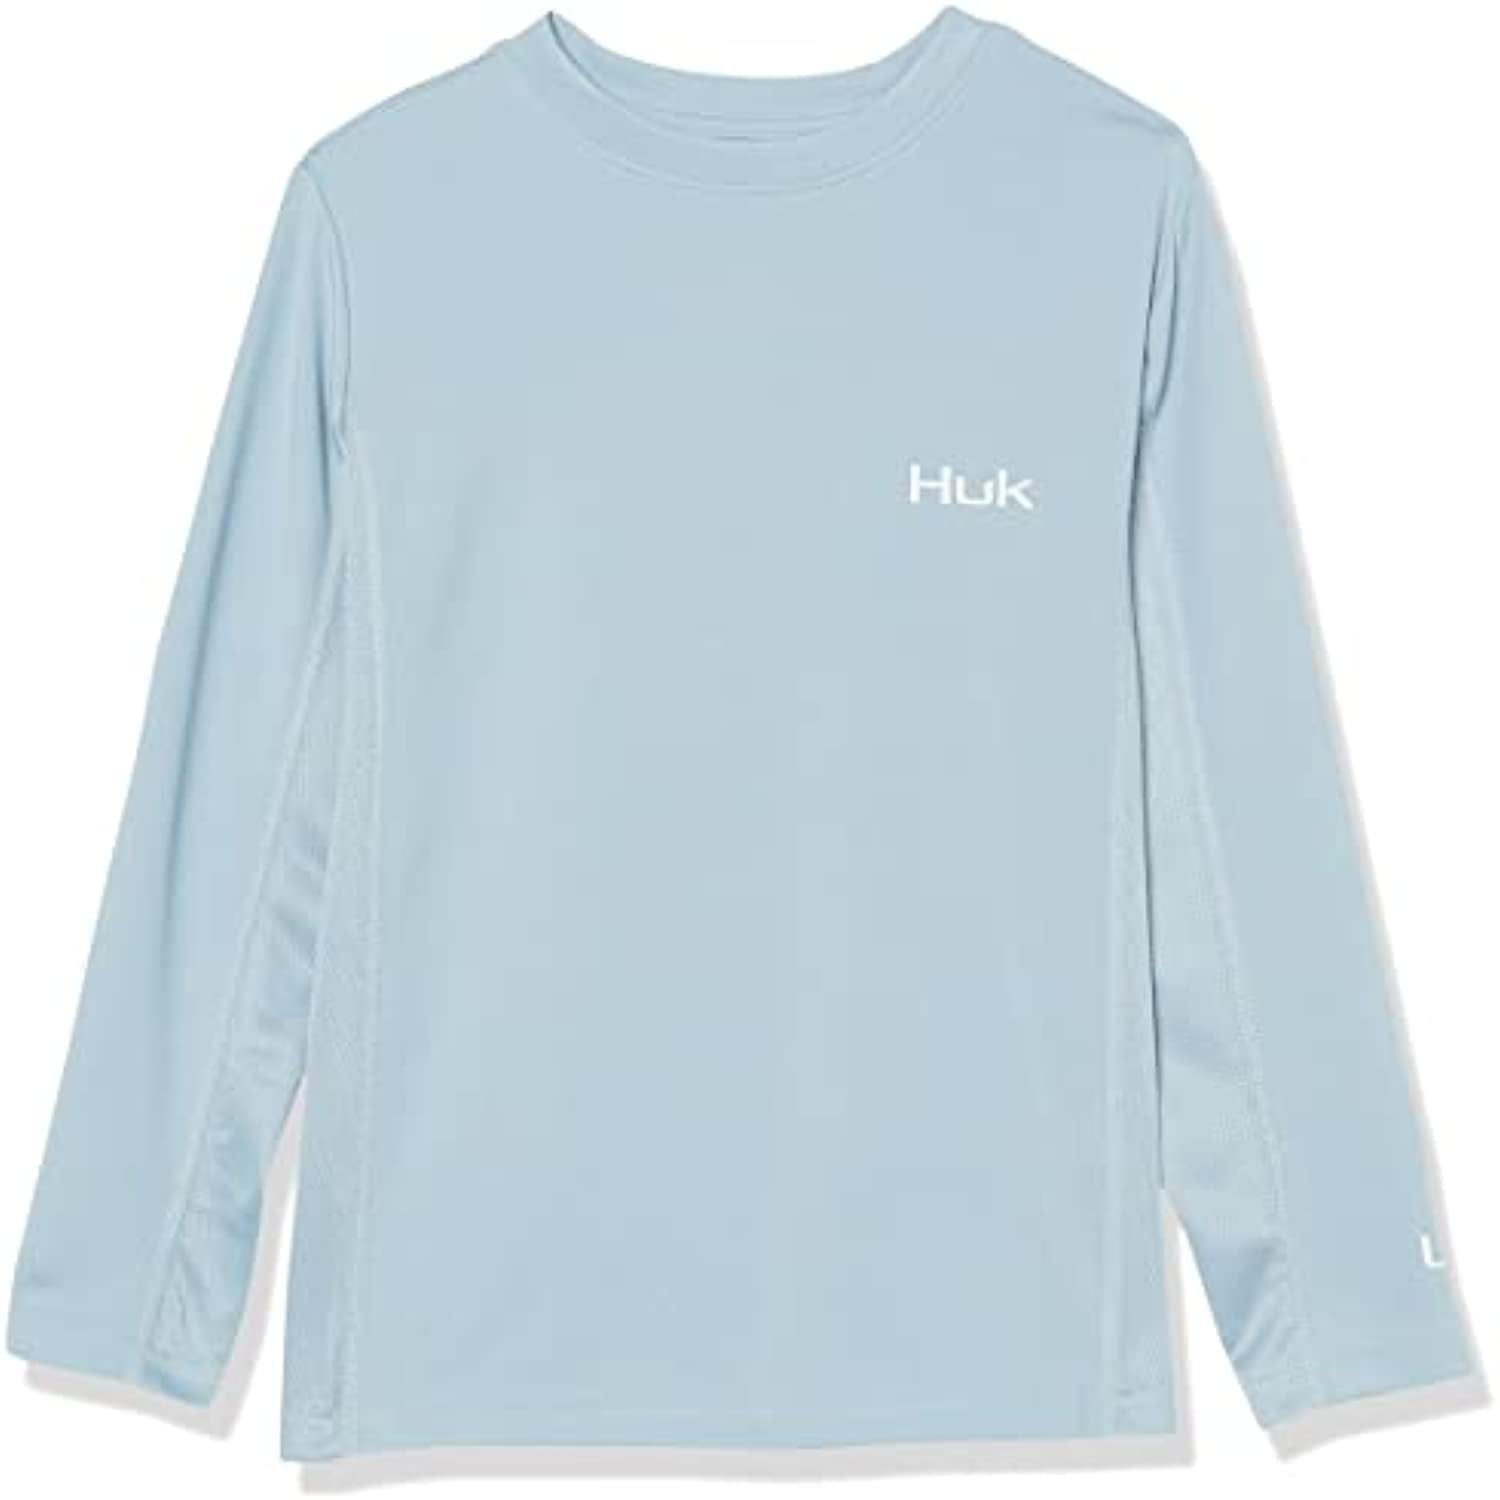 HUK Kids' Standard Icon X Long-Sleeve Shirt with Sun Protection, Blue Fog,  X-Small 